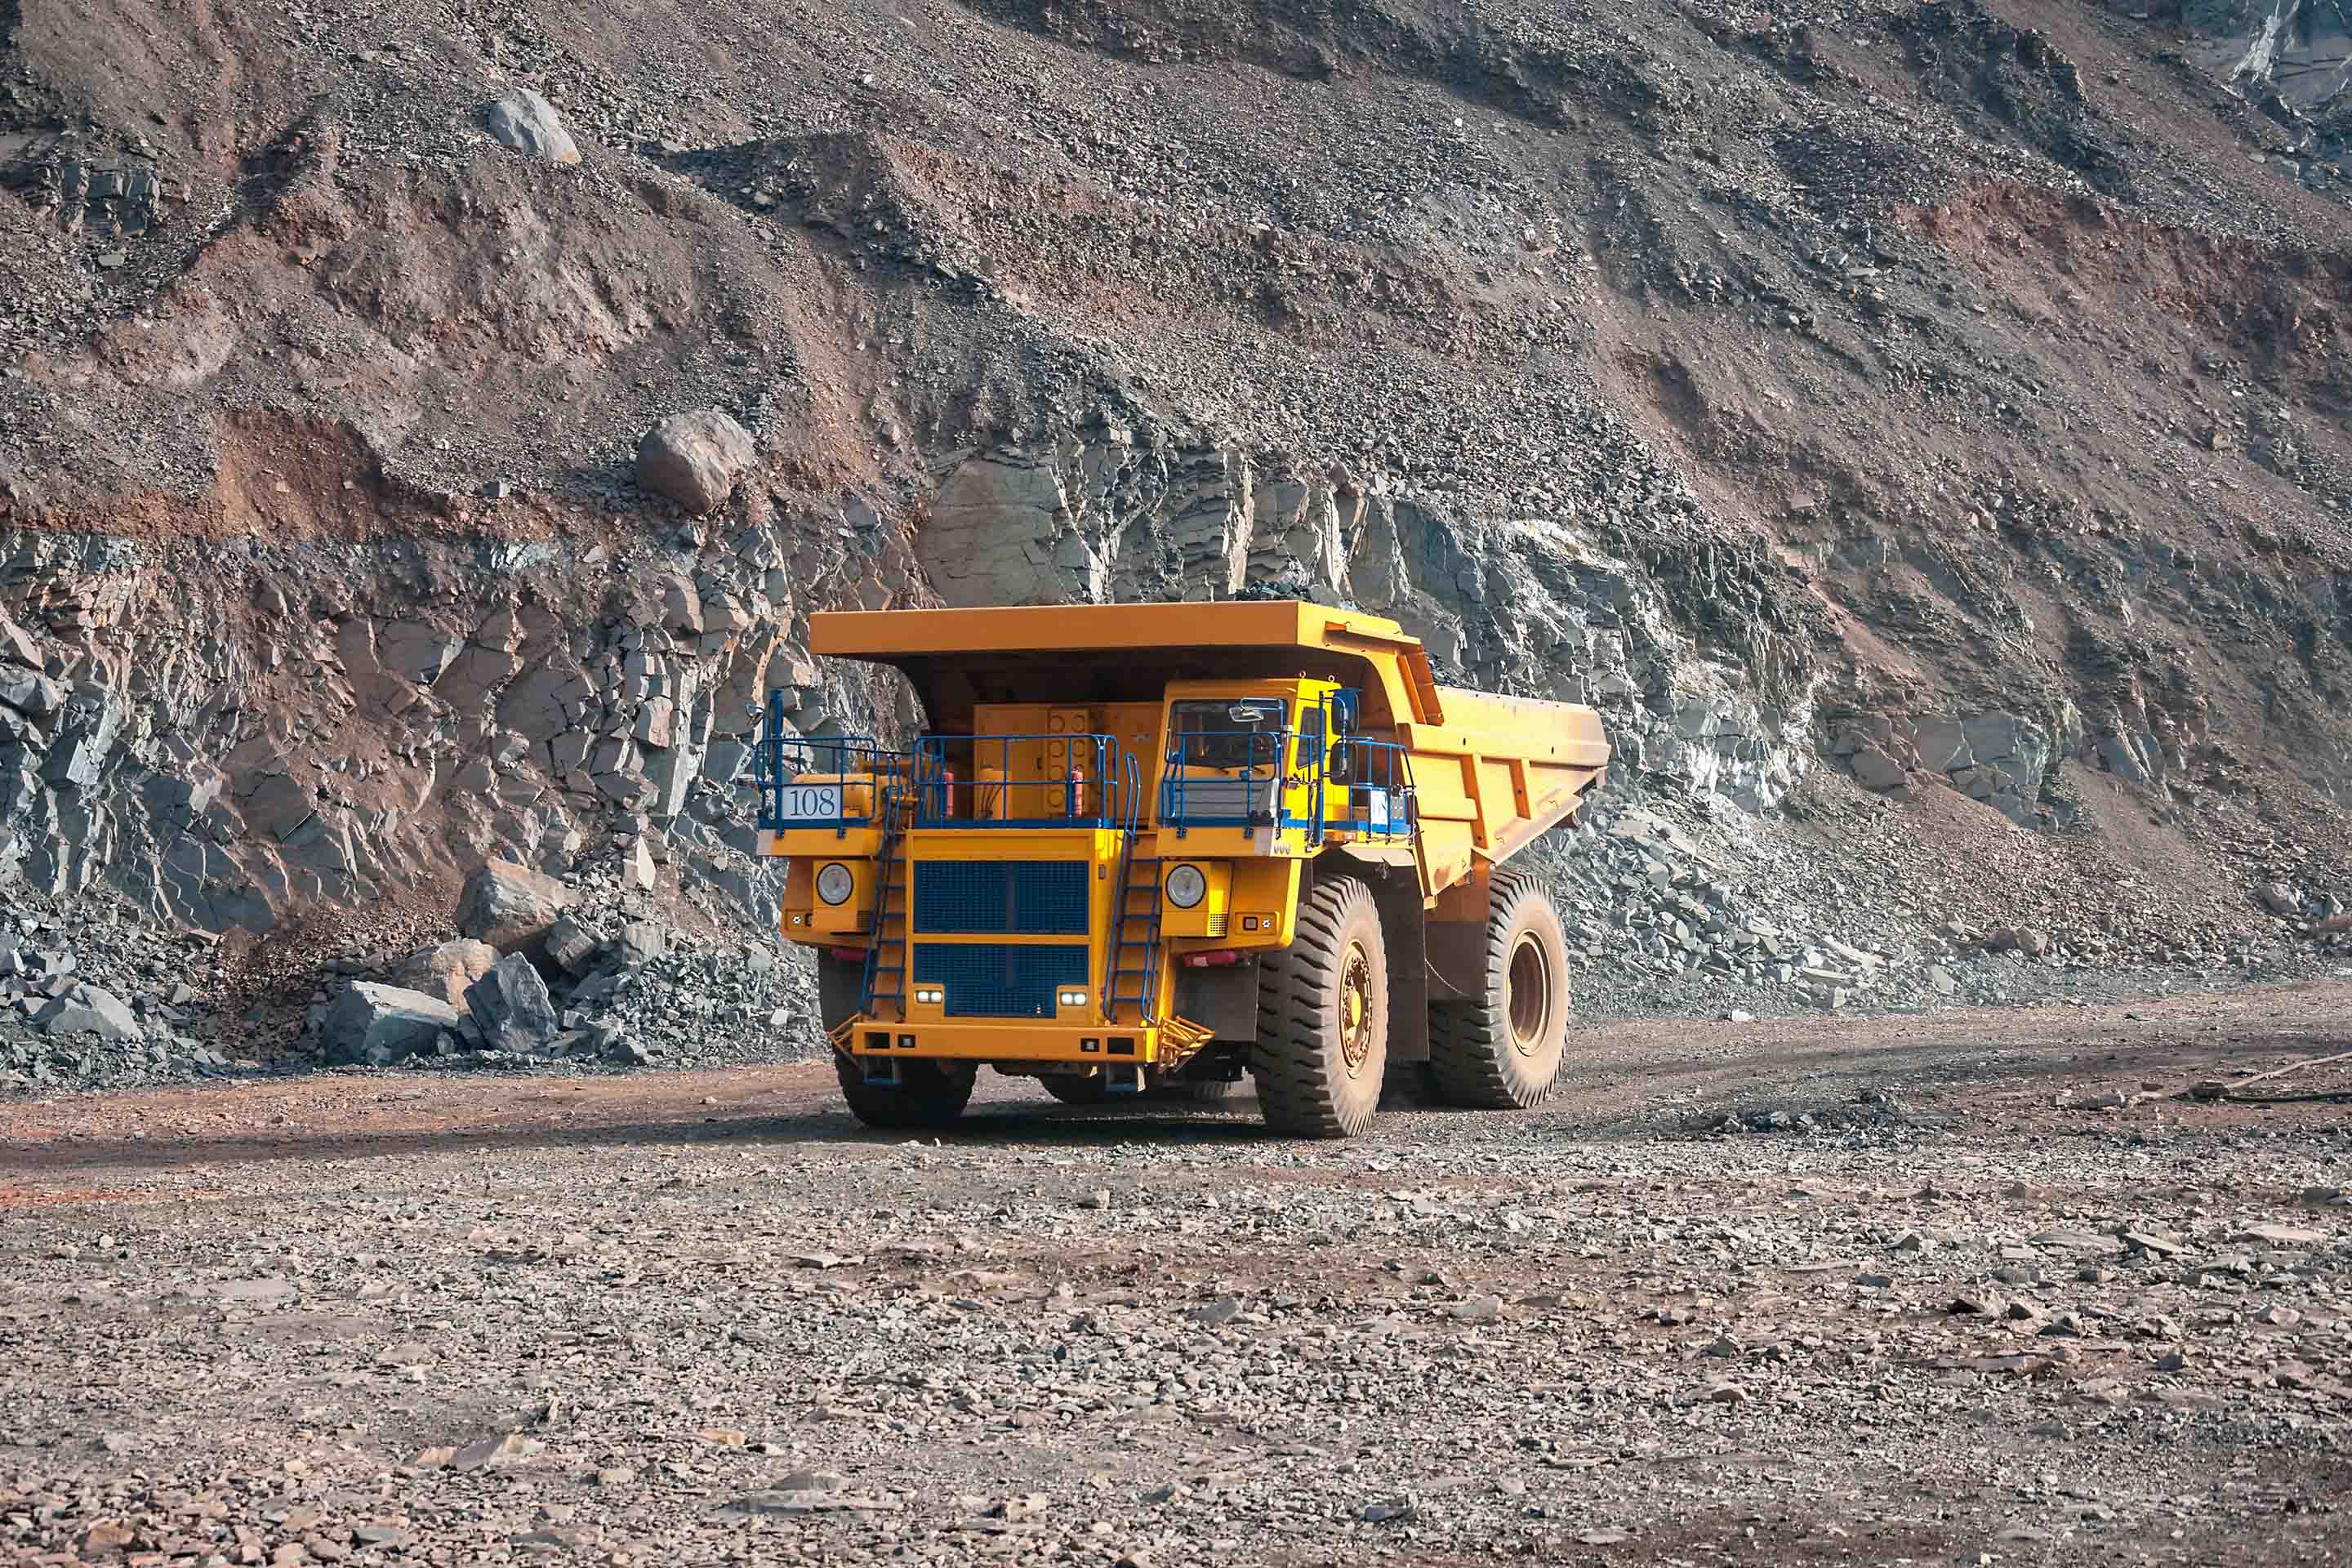 An image of a mining truck in a quarry